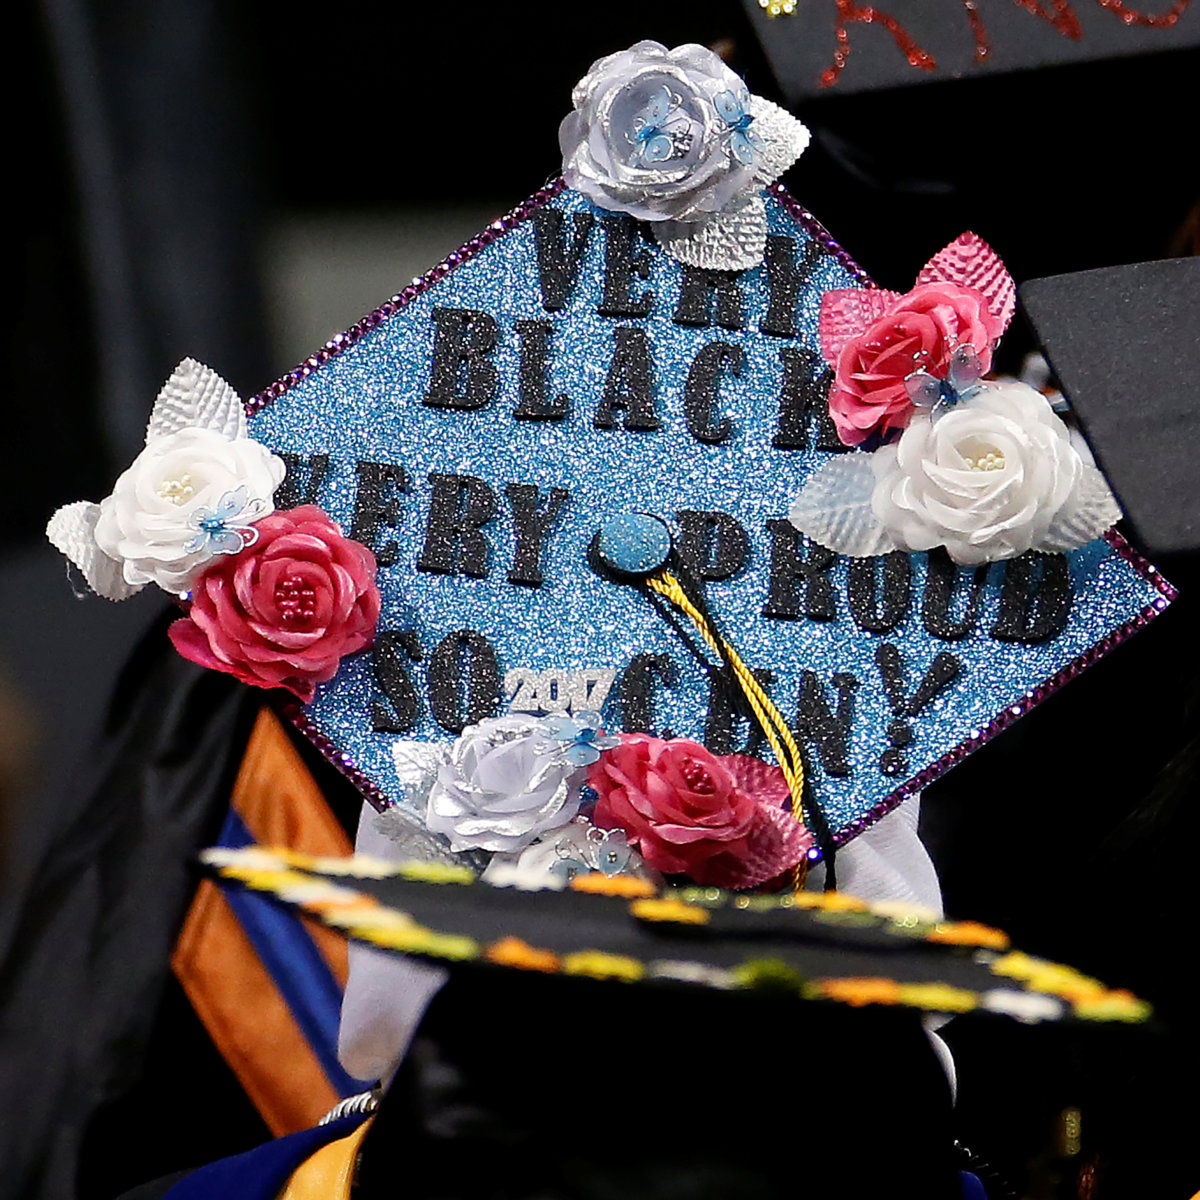 A graduate’s mortar board hat is pictured during a commencement for Medgar Evers College in the Brooklyn borough of New York City